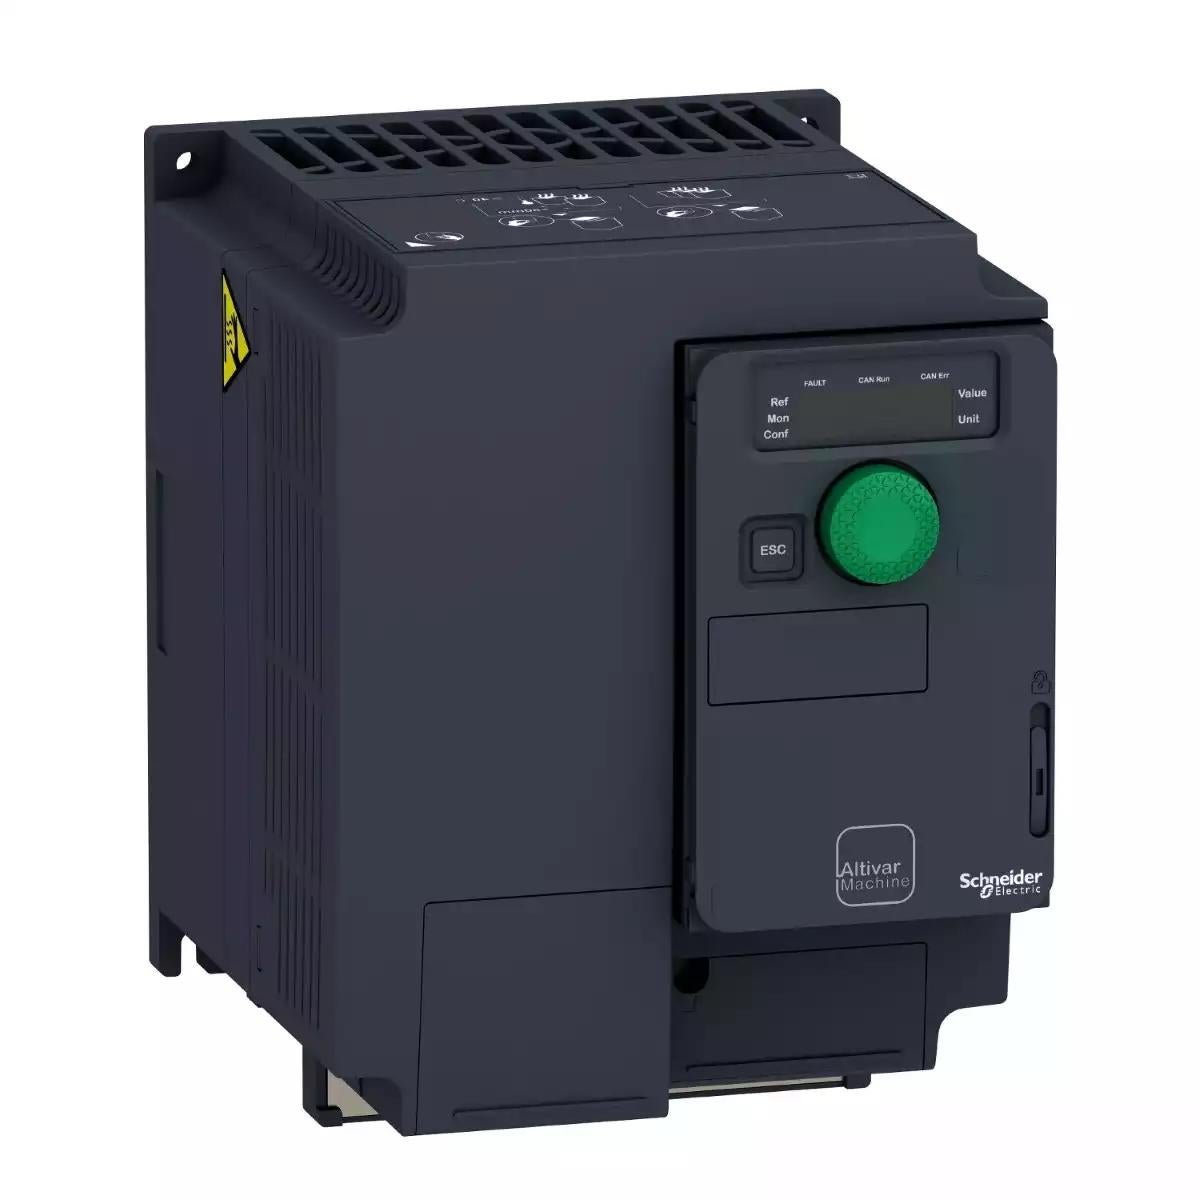 Schneider Electric Altivar 320 variable speed drive, ATV320, 2.2 kW, 380â€¦500 V, 3 phases, compact